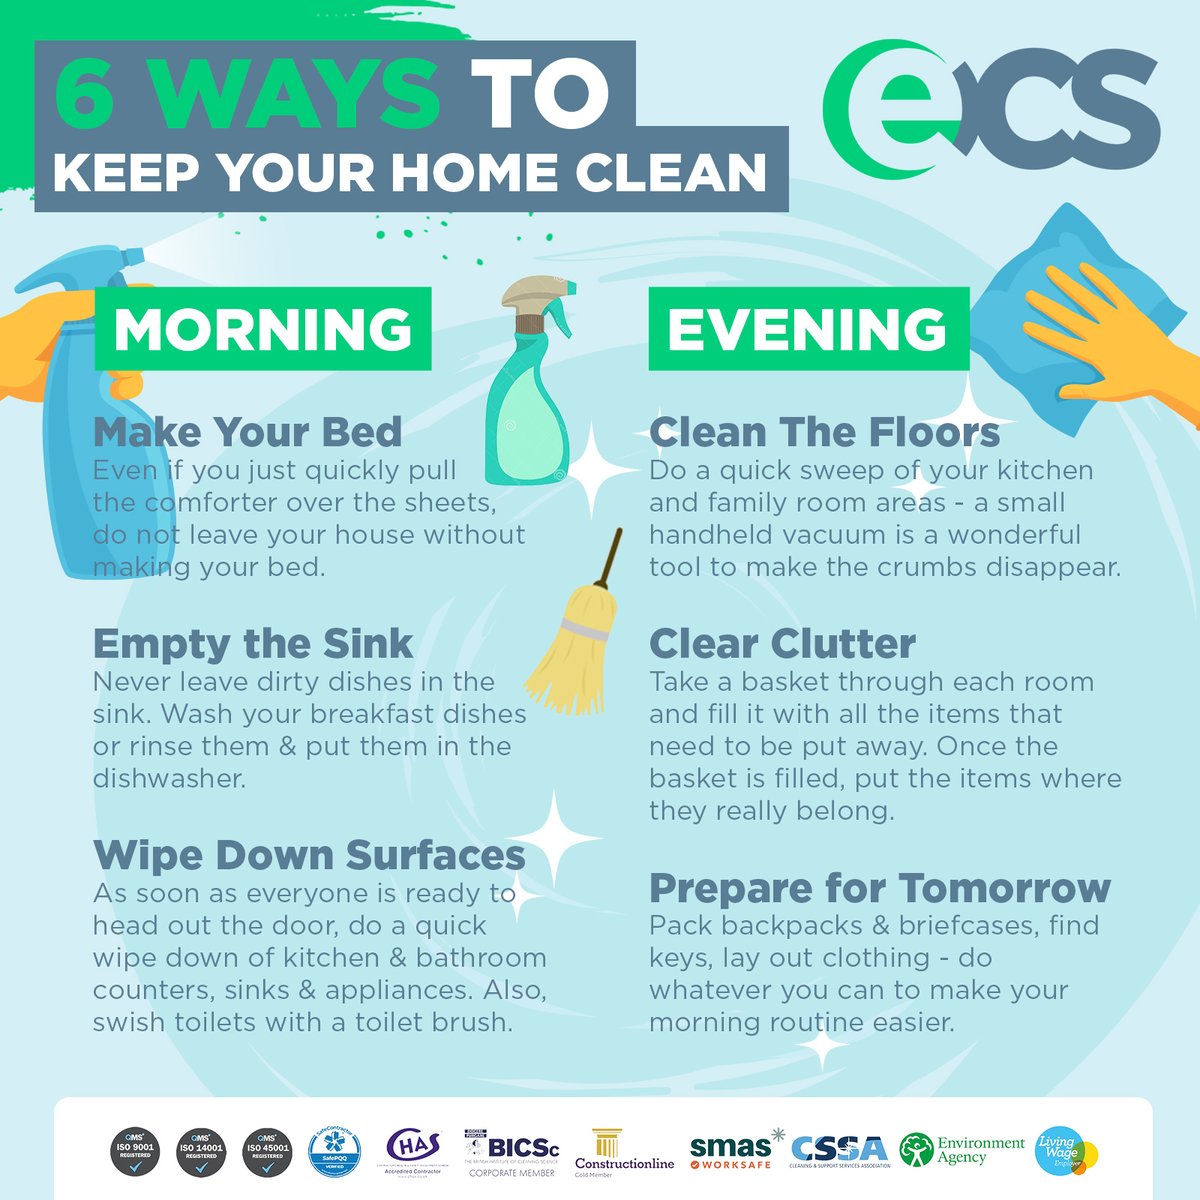 Cleaning your home doesn’t need to take all day.🧹 Check out our essential #homecleaning tips! 
For professional #domesticcleaning services, Reach out to ECS today! 💚
ecscommercialcleaning.co.uk/domestic-clean…